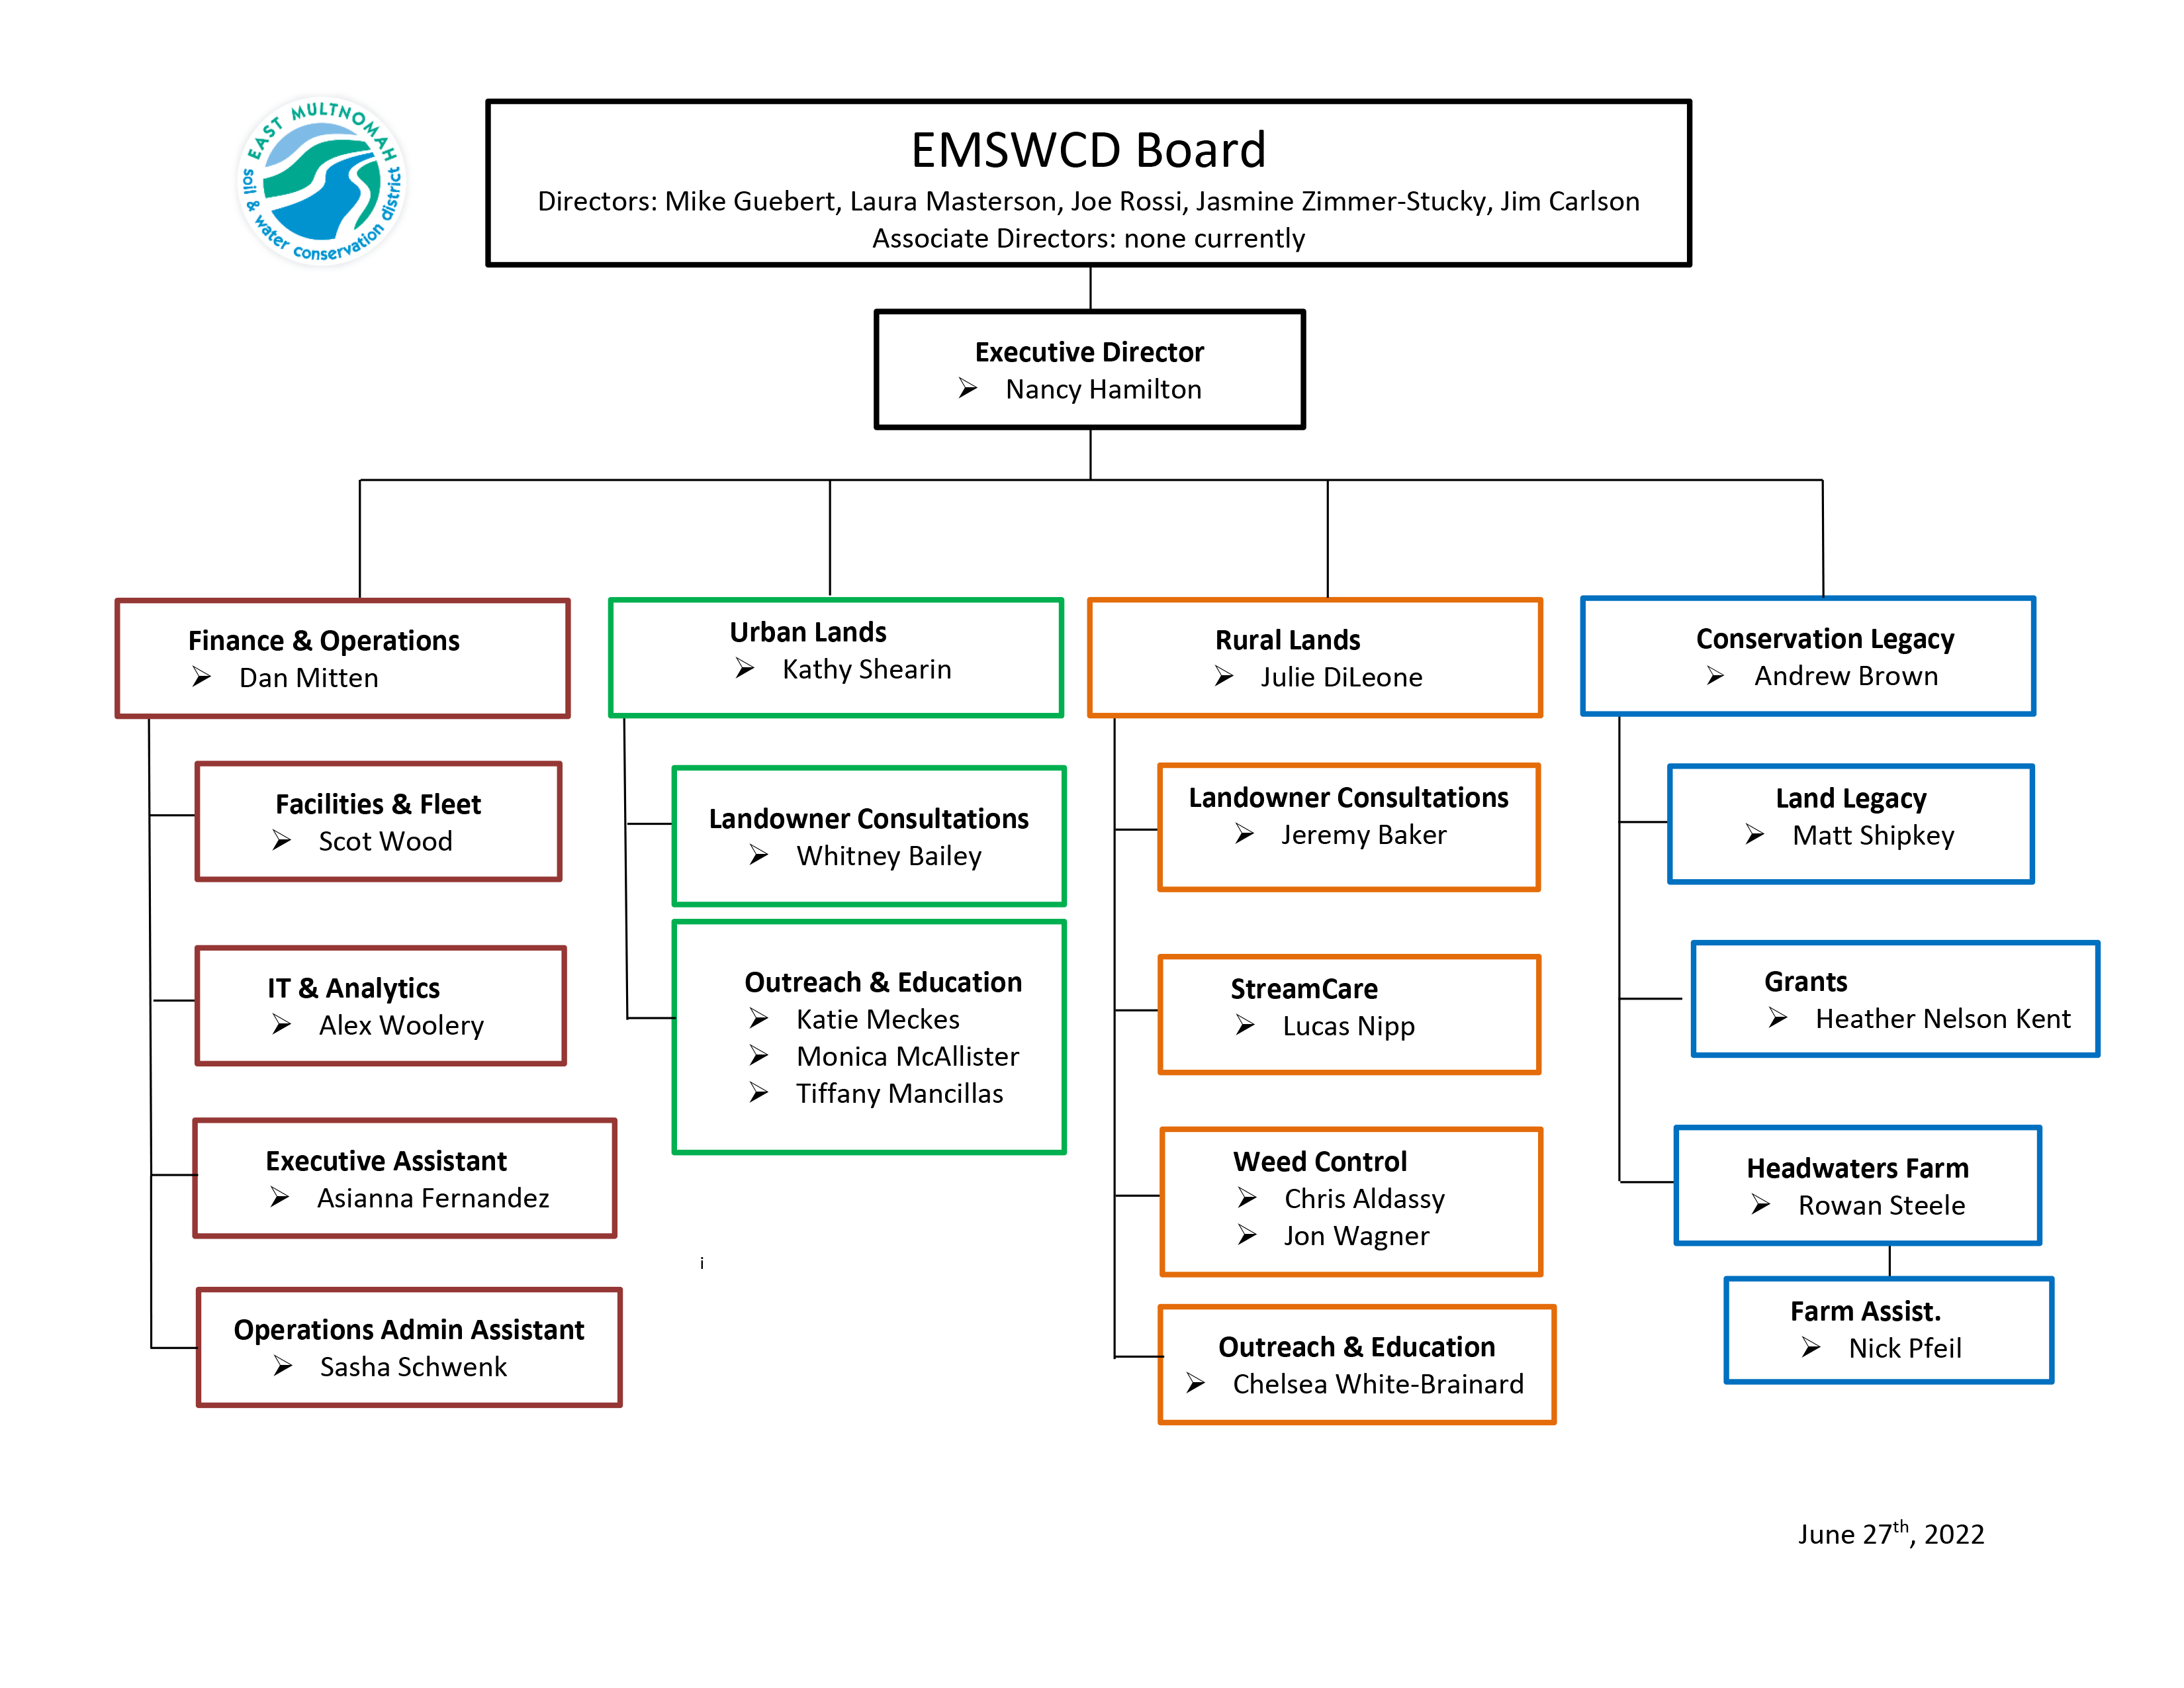 EMSWCD Organizational Chart showing the hierarchy of Board, the Executive Director, Supervisors and staff – updated June 27th, 2022